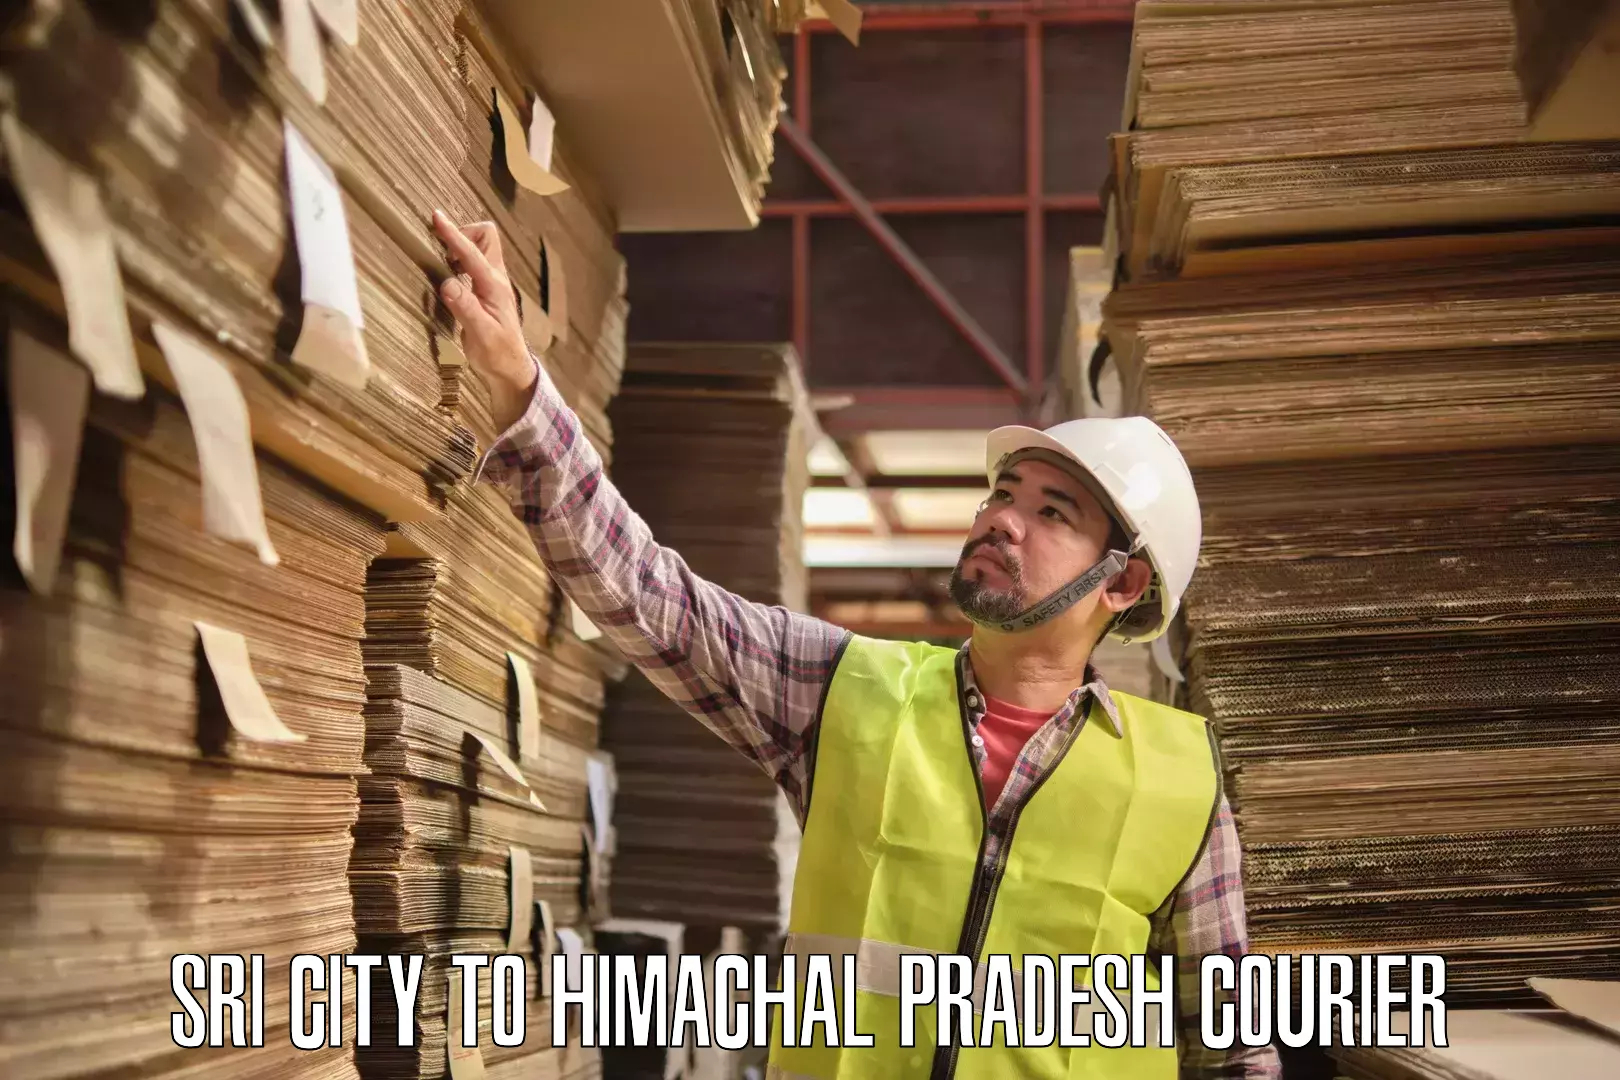 Weekend courier service Sri City to Himachal Pradesh